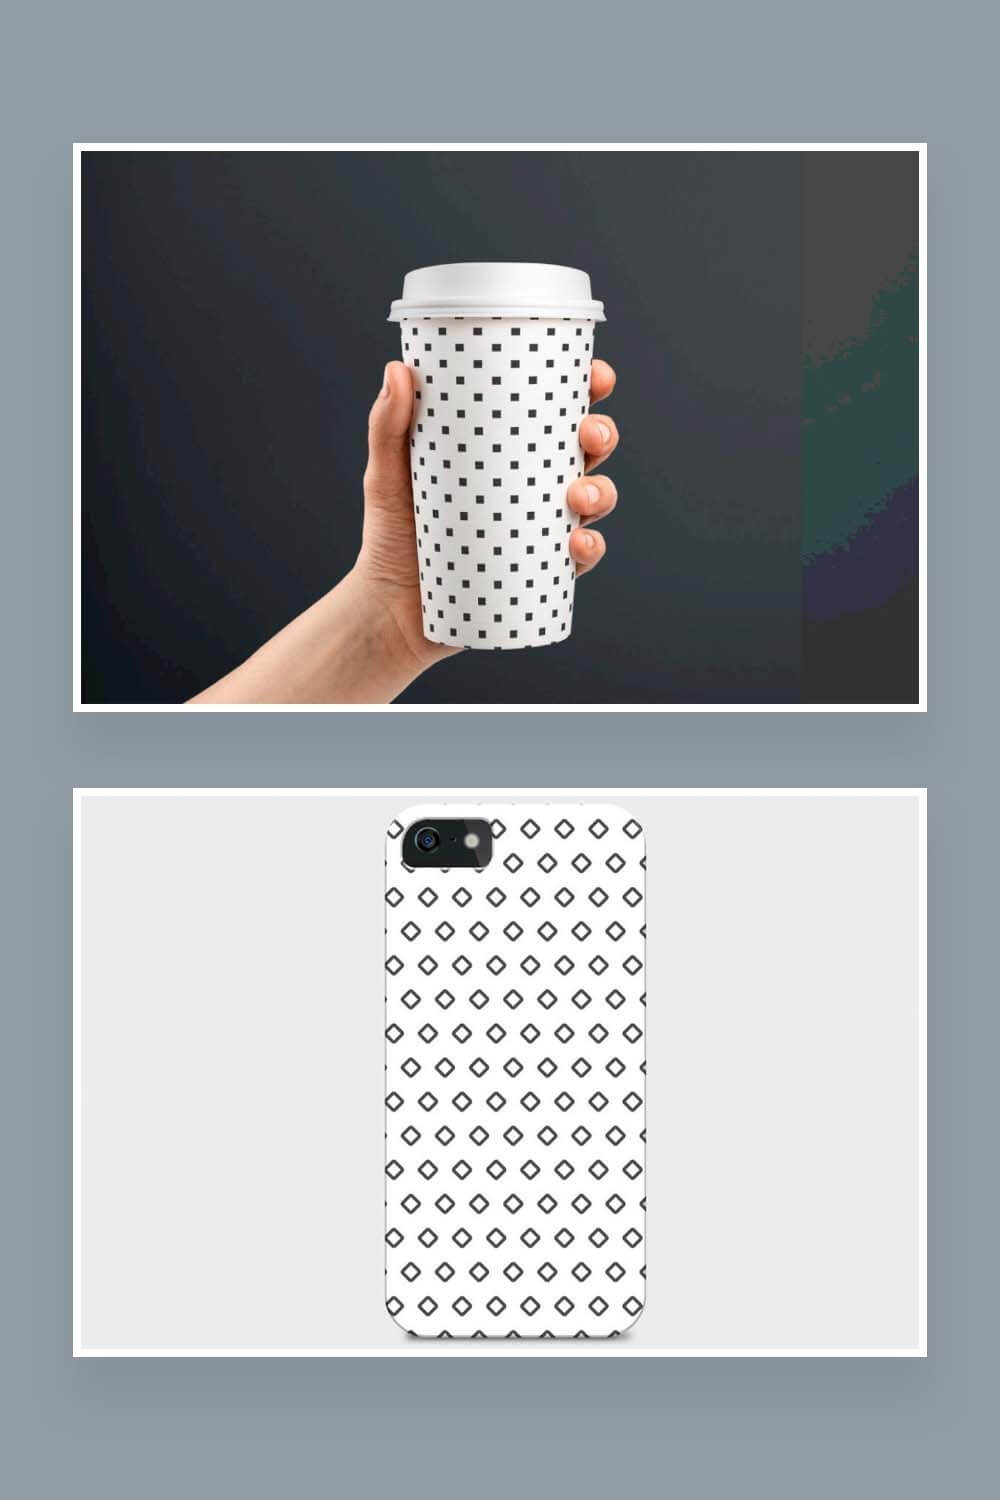 Two examples of seamless geometric patterns in black and white on a glass with a lid and a phone bumper.